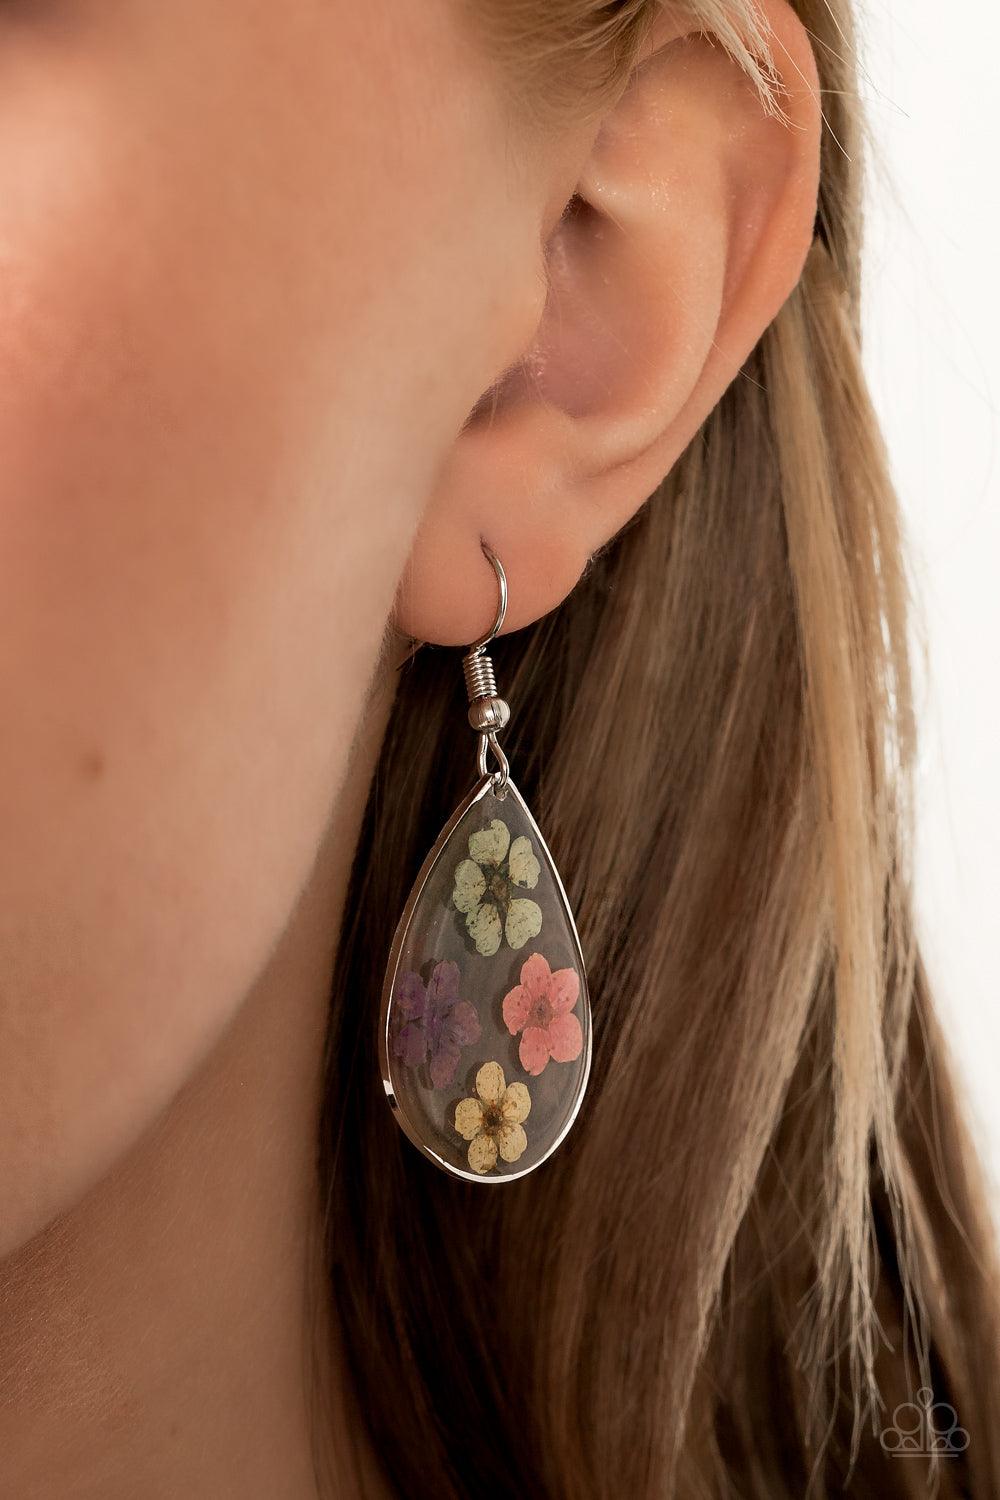 Paparazzi Accessories Perennial Prairie - Multi Dainty green, pink, purple, and yellow flowers are encased in a glassy teardrop, creating a whimsical frame. Earring attaches to a standard fishhook fitting. Sold as one pair of earrings. Jewelry